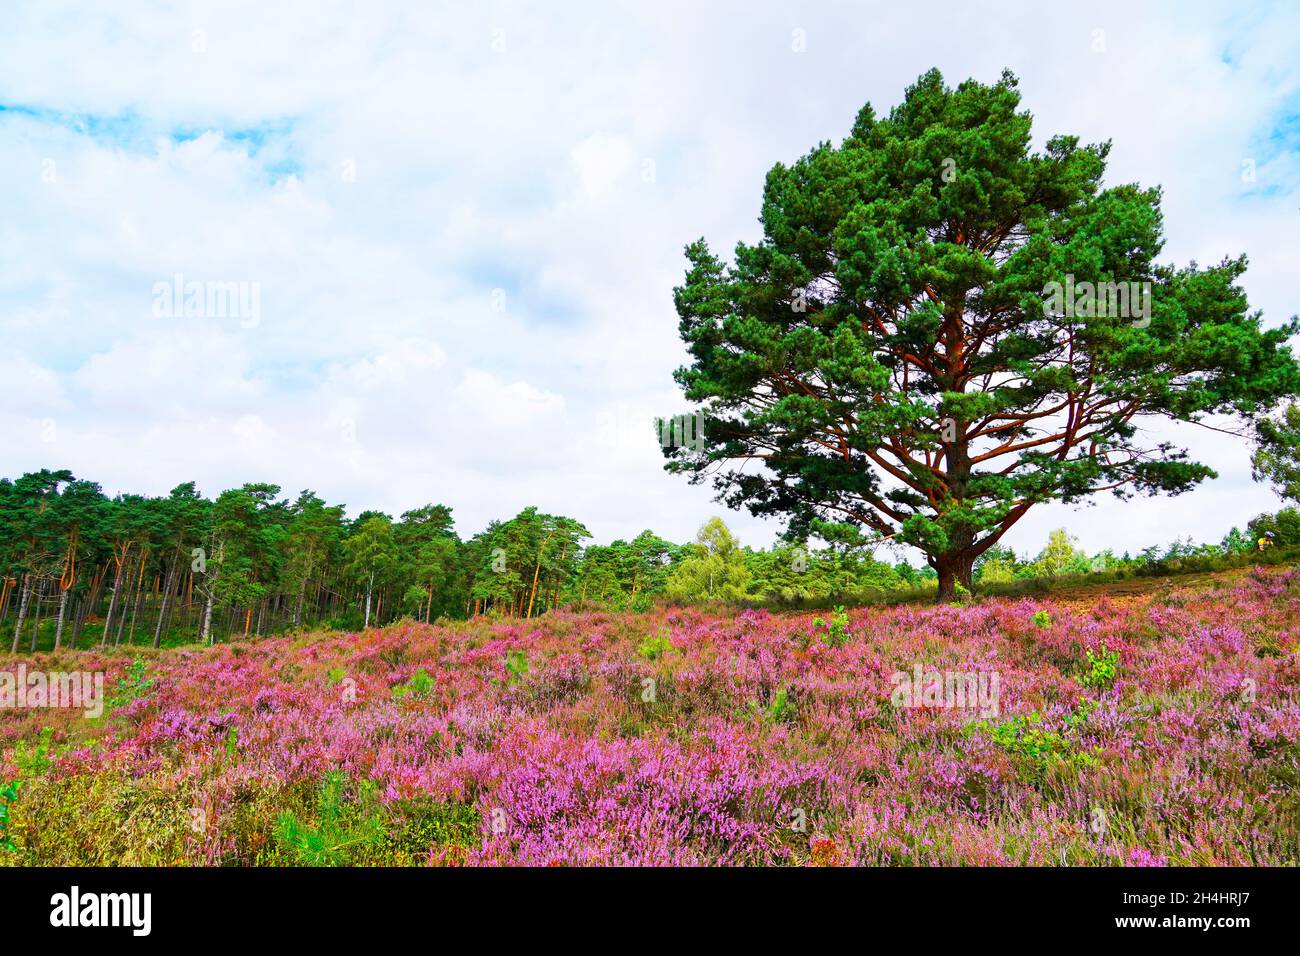 Weseler Heide nature reserve. Landscape with blooming heather plants near the Lueneburg Heath. Stock Photo